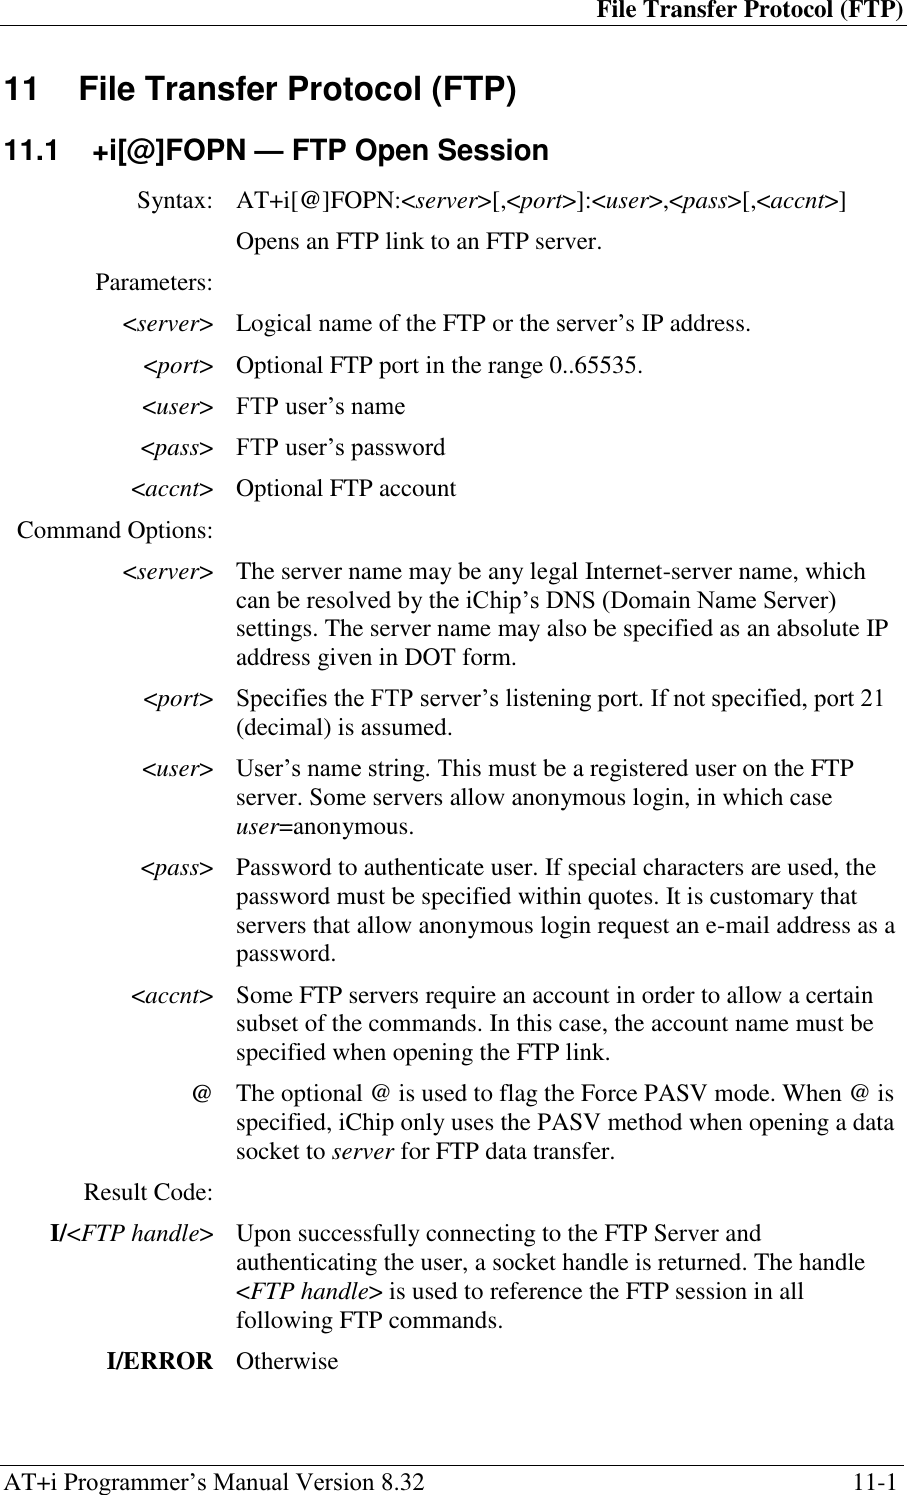 File Transfer Protocol (FTP) AT+i Programmer‘s Manual Version 8.32  11-1 11  File Transfer Protocol (FTP) 11.1  +i[@]FOPN — FTP Open Session Syntax: AT+i[@]FOPN:&lt;server&gt;[,&lt;port&gt;]:&lt;user&gt;,&lt;pass&gt;[,&lt;accnt&gt;]  Opens an FTP link to an FTP server. Parameters:  &lt;server&gt; Logical name of the FTP or the server‘s IP address. &lt;port&gt; Optional FTP port in the range 0..65535. &lt;user&gt; FTP user‘s name &lt;pass&gt; FTP user‘s password &lt;accnt&gt; Optional FTP account Command Options:  &lt;server&gt; The server name may be any legal Internet-server name, which can be resolved by the iChip‘s DNS (Domain Name Server) settings. The server name may also be specified as an absolute IP address given in DOT form. &lt;port&gt; Specifies the FTP server‘s listening port. If not specified, port 21 (decimal) is assumed. &lt;user&gt; User‘s name string. This must be a registered user on the FTP server. Some servers allow anonymous login, in which case user=anonymous. &lt;pass&gt; Password to authenticate user. If special characters are used, the password must be specified within quotes. It is customary that servers that allow anonymous login request an e-mail address as a password. &lt;accnt&gt; Some FTP servers require an account in order to allow a certain subset of the commands. In this case, the account name must be specified when opening the FTP link. @ The optional @ is used to flag the Force PASV mode. When @ is specified, iChip only uses the PASV method when opening a data socket to server for FTP data transfer. Result Code:  I/&lt;FTP handle&gt; Upon successfully connecting to the FTP Server and authenticating the user, a socket handle is returned. The handle &lt;FTP handle&gt; is used to reference the FTP session in all following FTP commands. I/ERROR Otherwise 